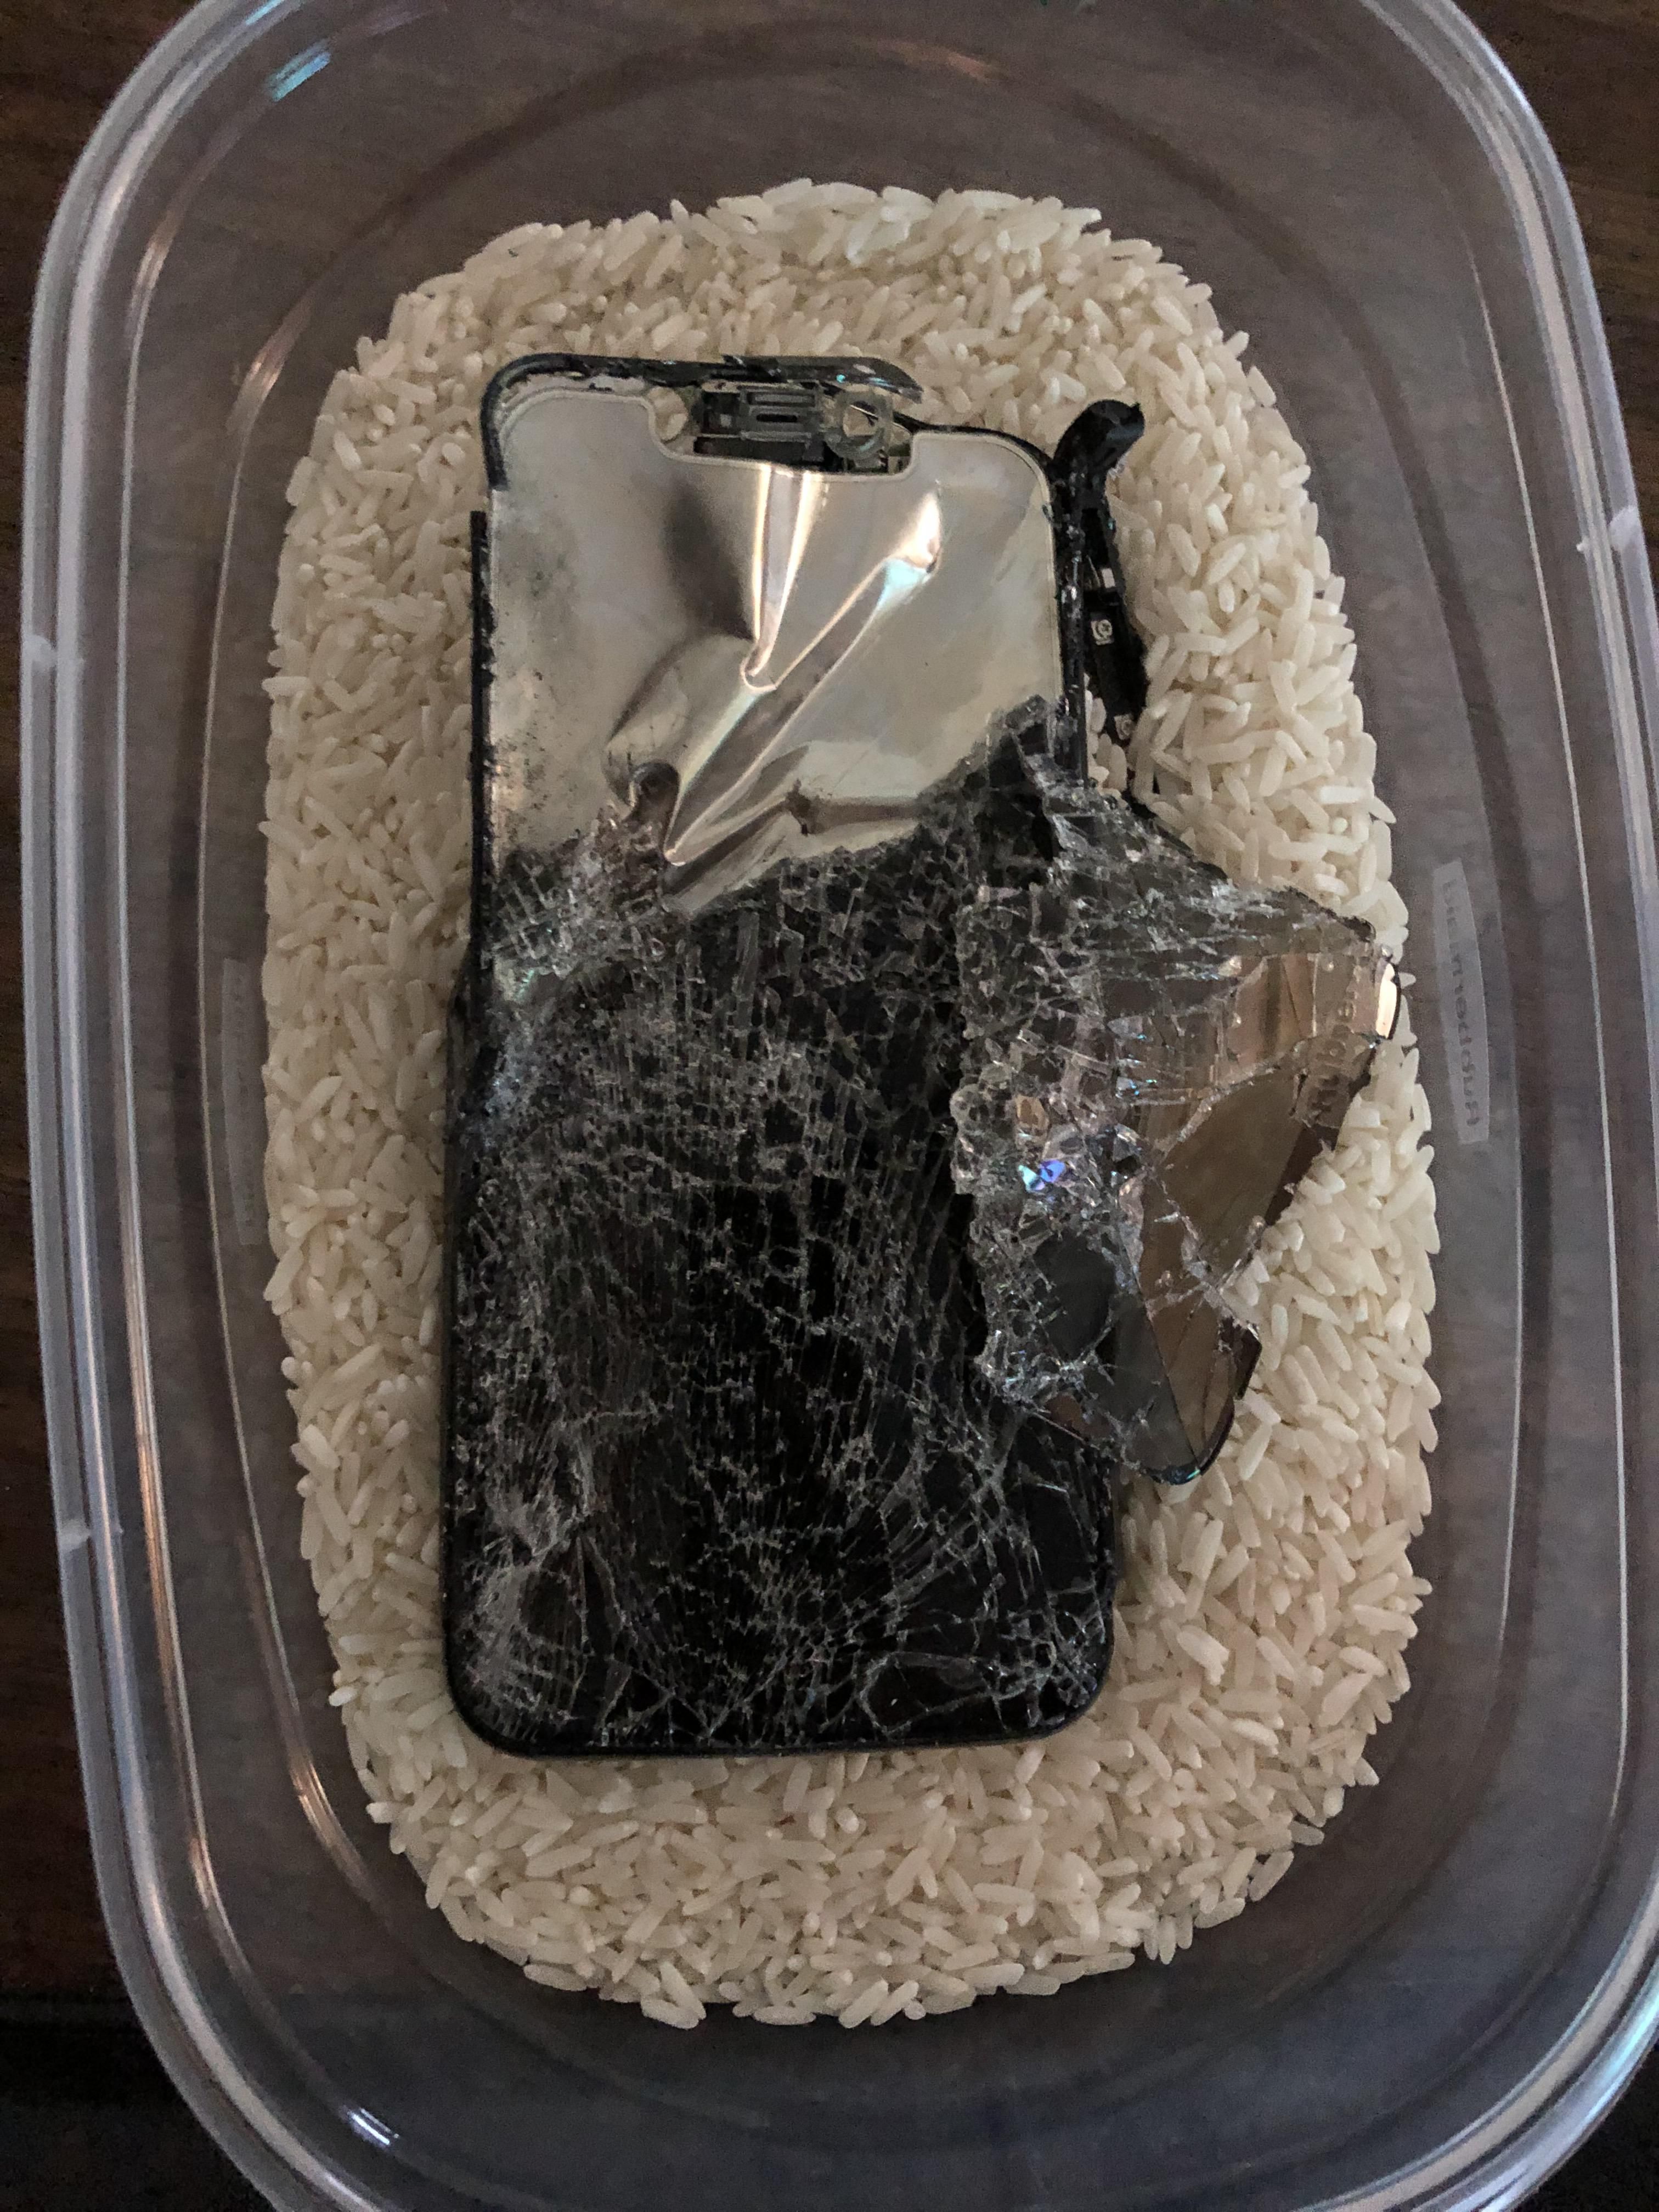 Just put your phone in rice, should be fine in the morning